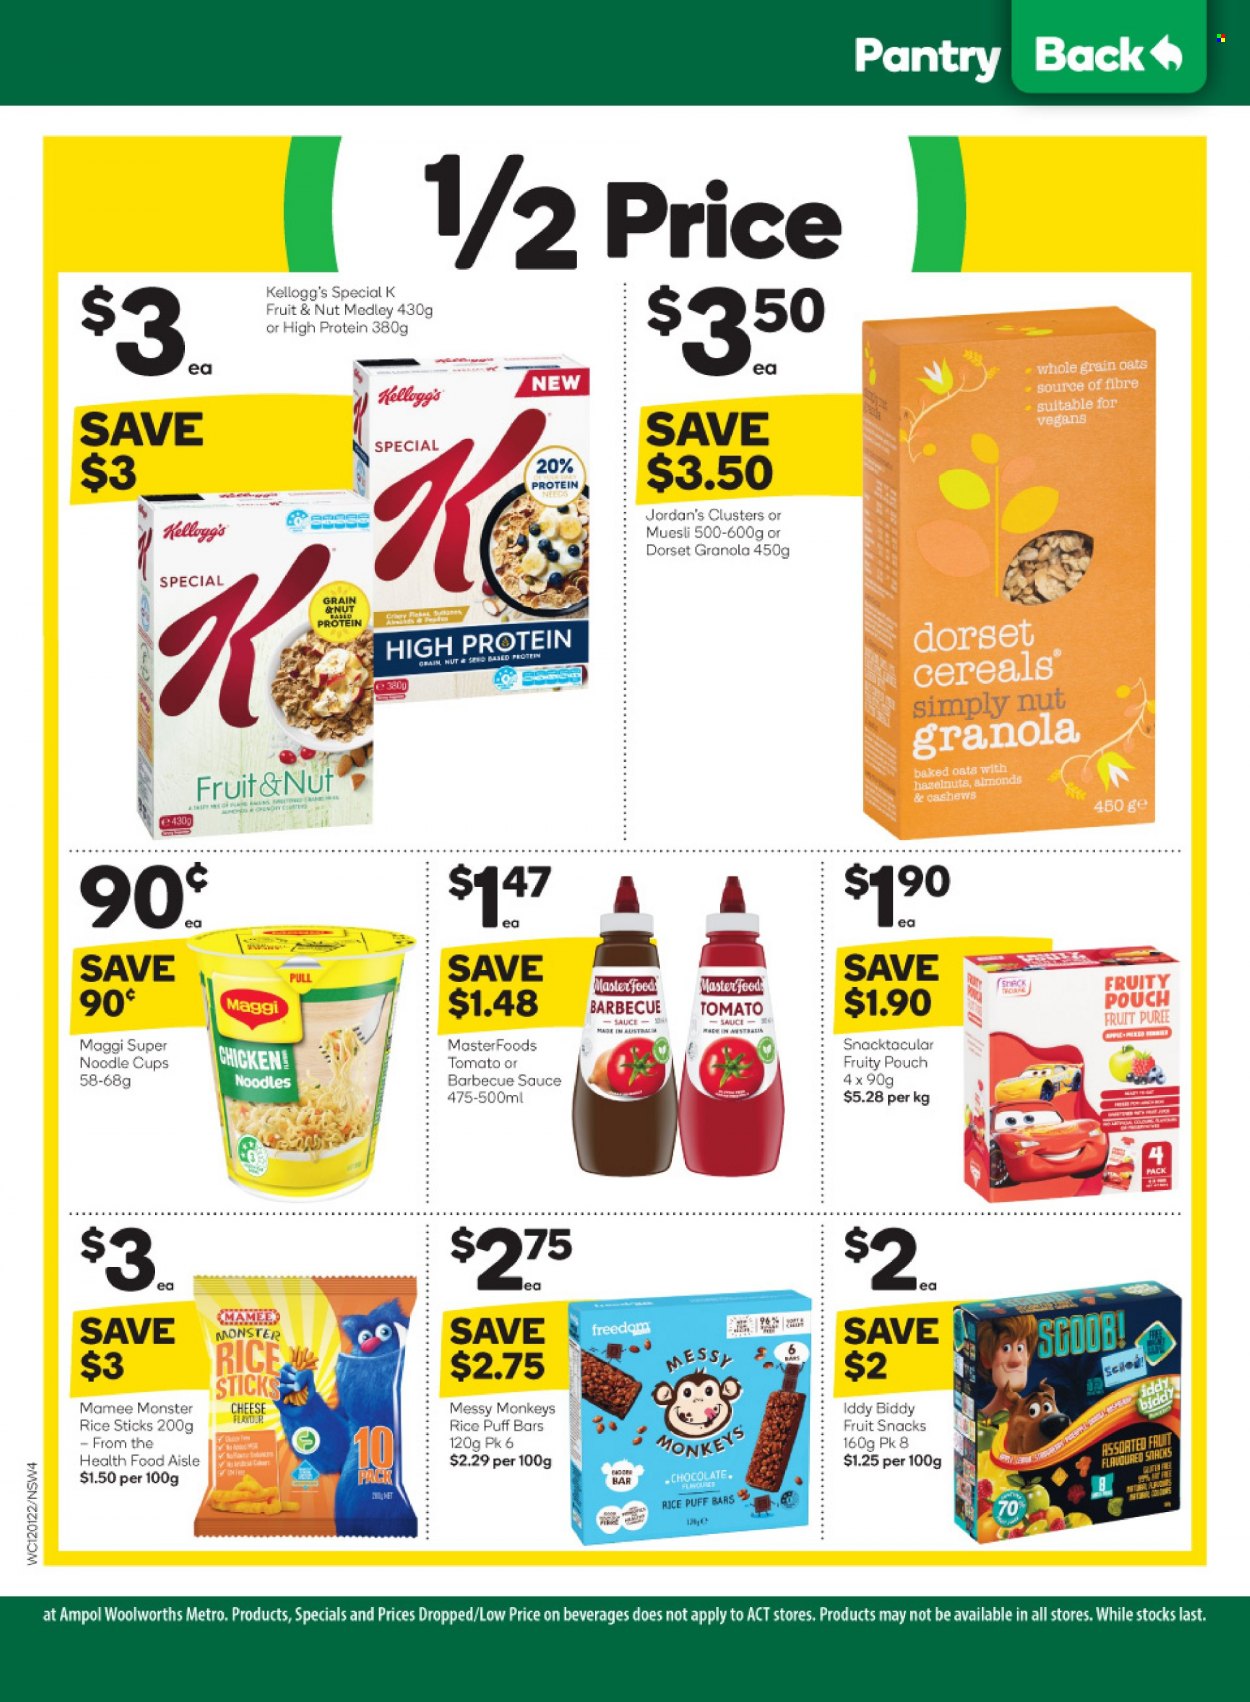 thumbnail - Woolworths Catalogue - 12 Jan 2022 - 18 Jan 2022 - Sales products - sauce, noodles, cheese, chocolate, Kellogg's, fruit snack, oats, Maggi, cereals, granola, muesli, rice, BBQ sauce, almonds, cashews, Monster, cup, Jordan. Page 4.